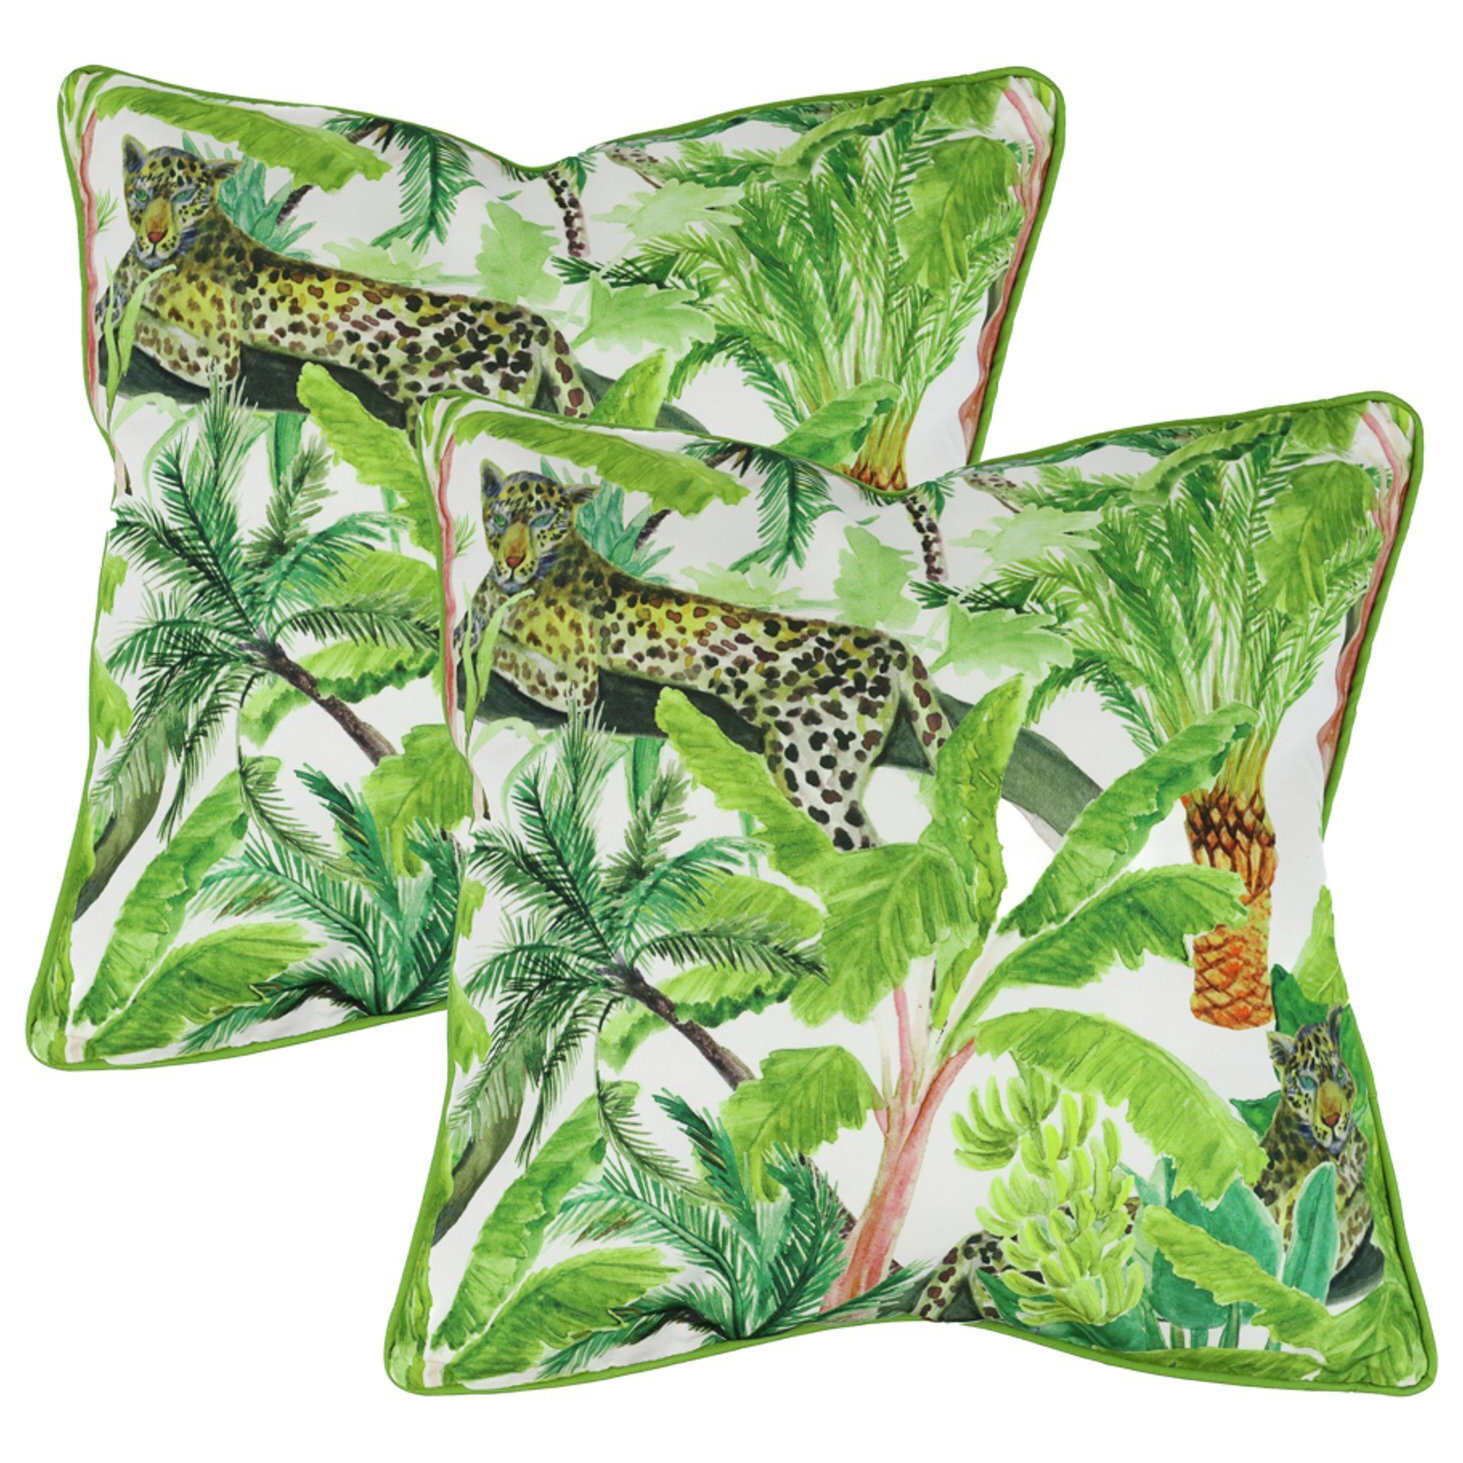 Streetwize Leopard Jungle Outdoor Cushions - Pack of 4 - image 1